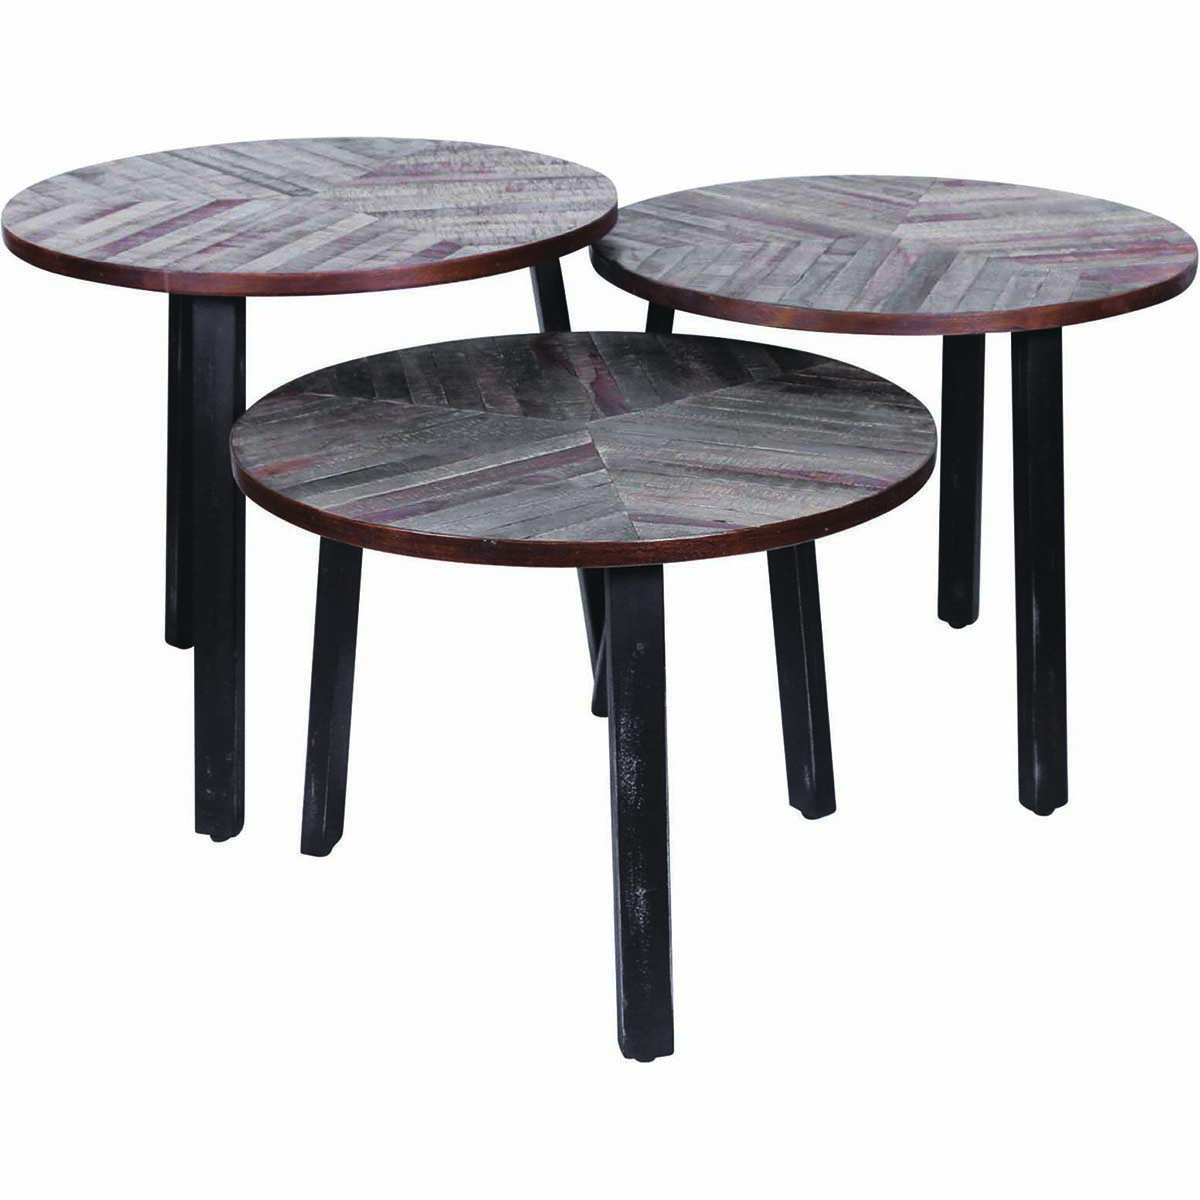 Three Leaves Accent Table (Set of 3)